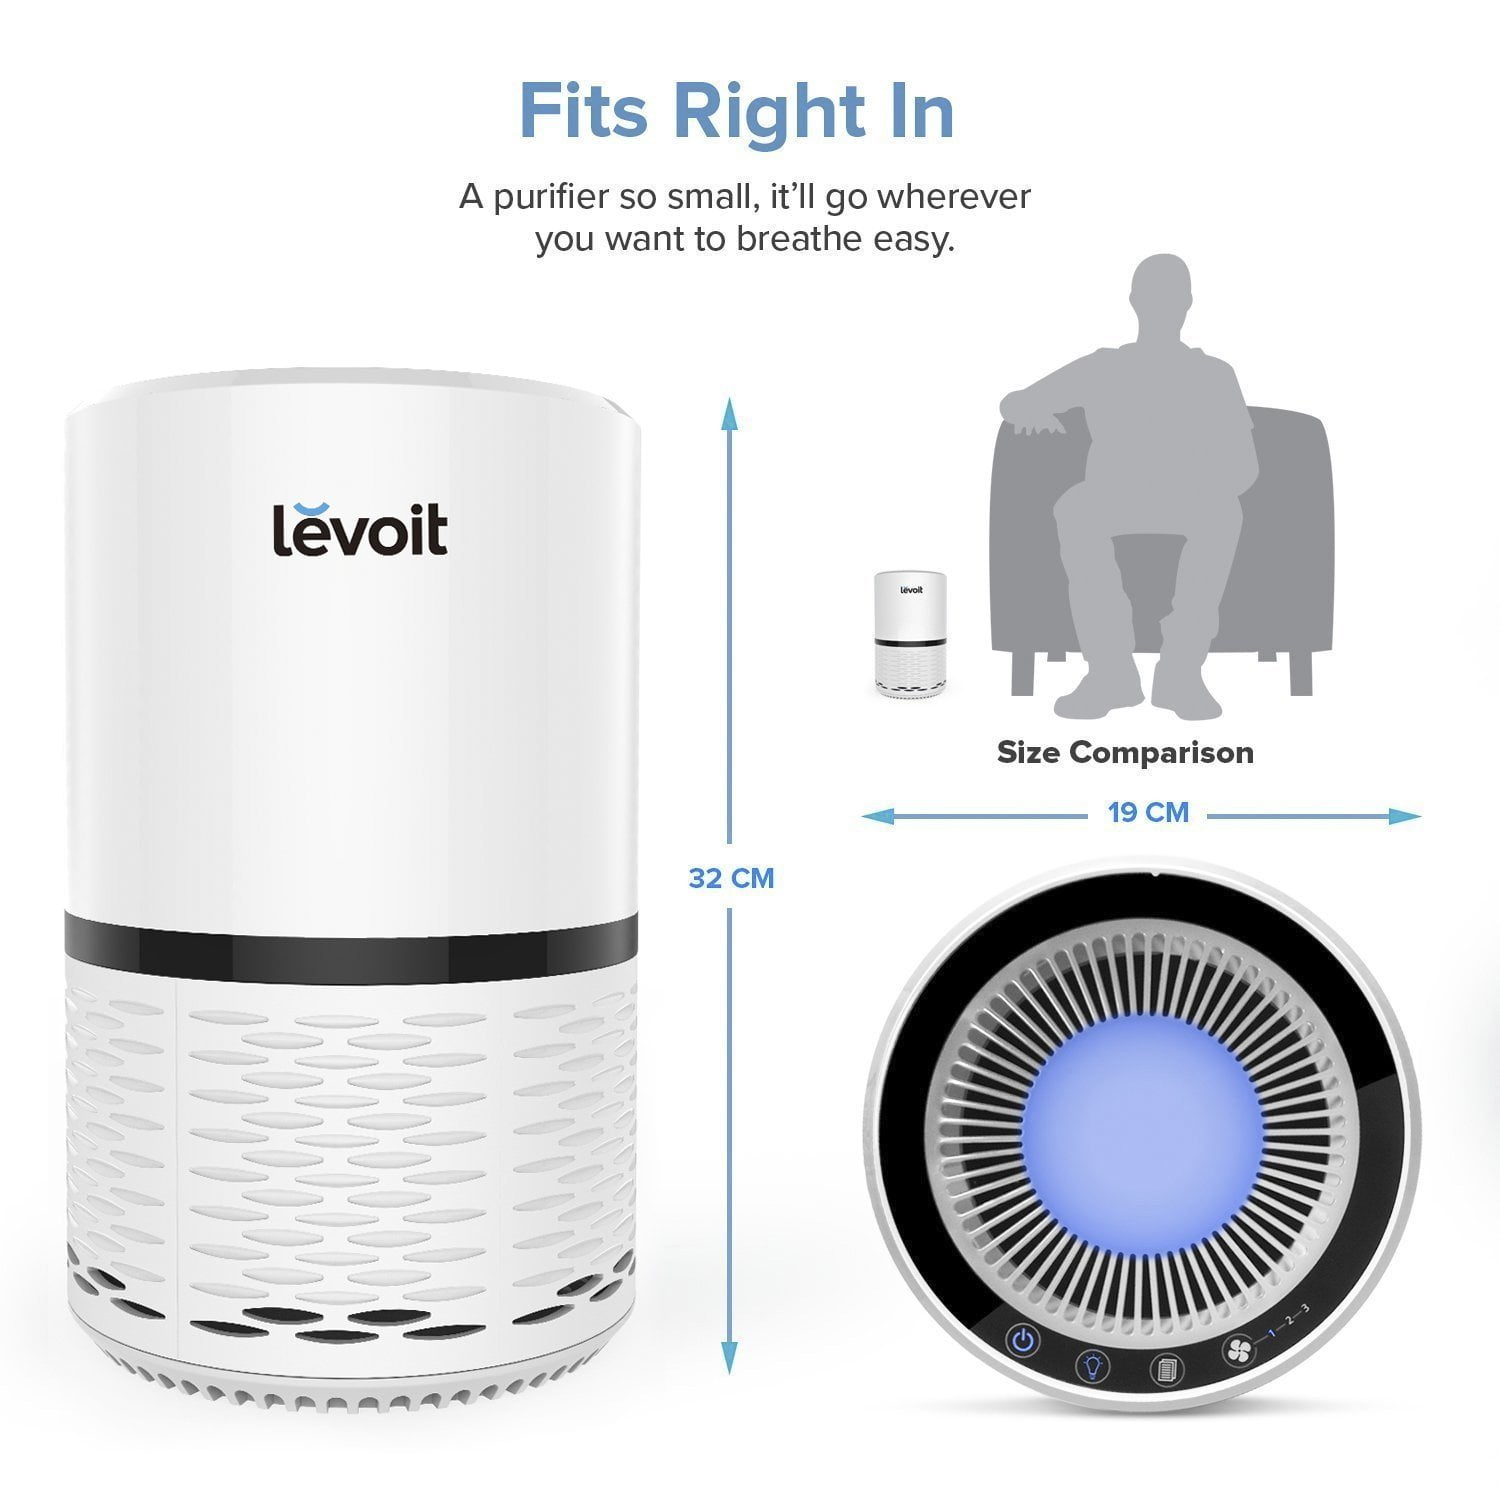 Filter Bros LV-H132 compatible with LEVOIT True HEPA Air Purifier Repl –  Filter Bros Hand Crafted Living